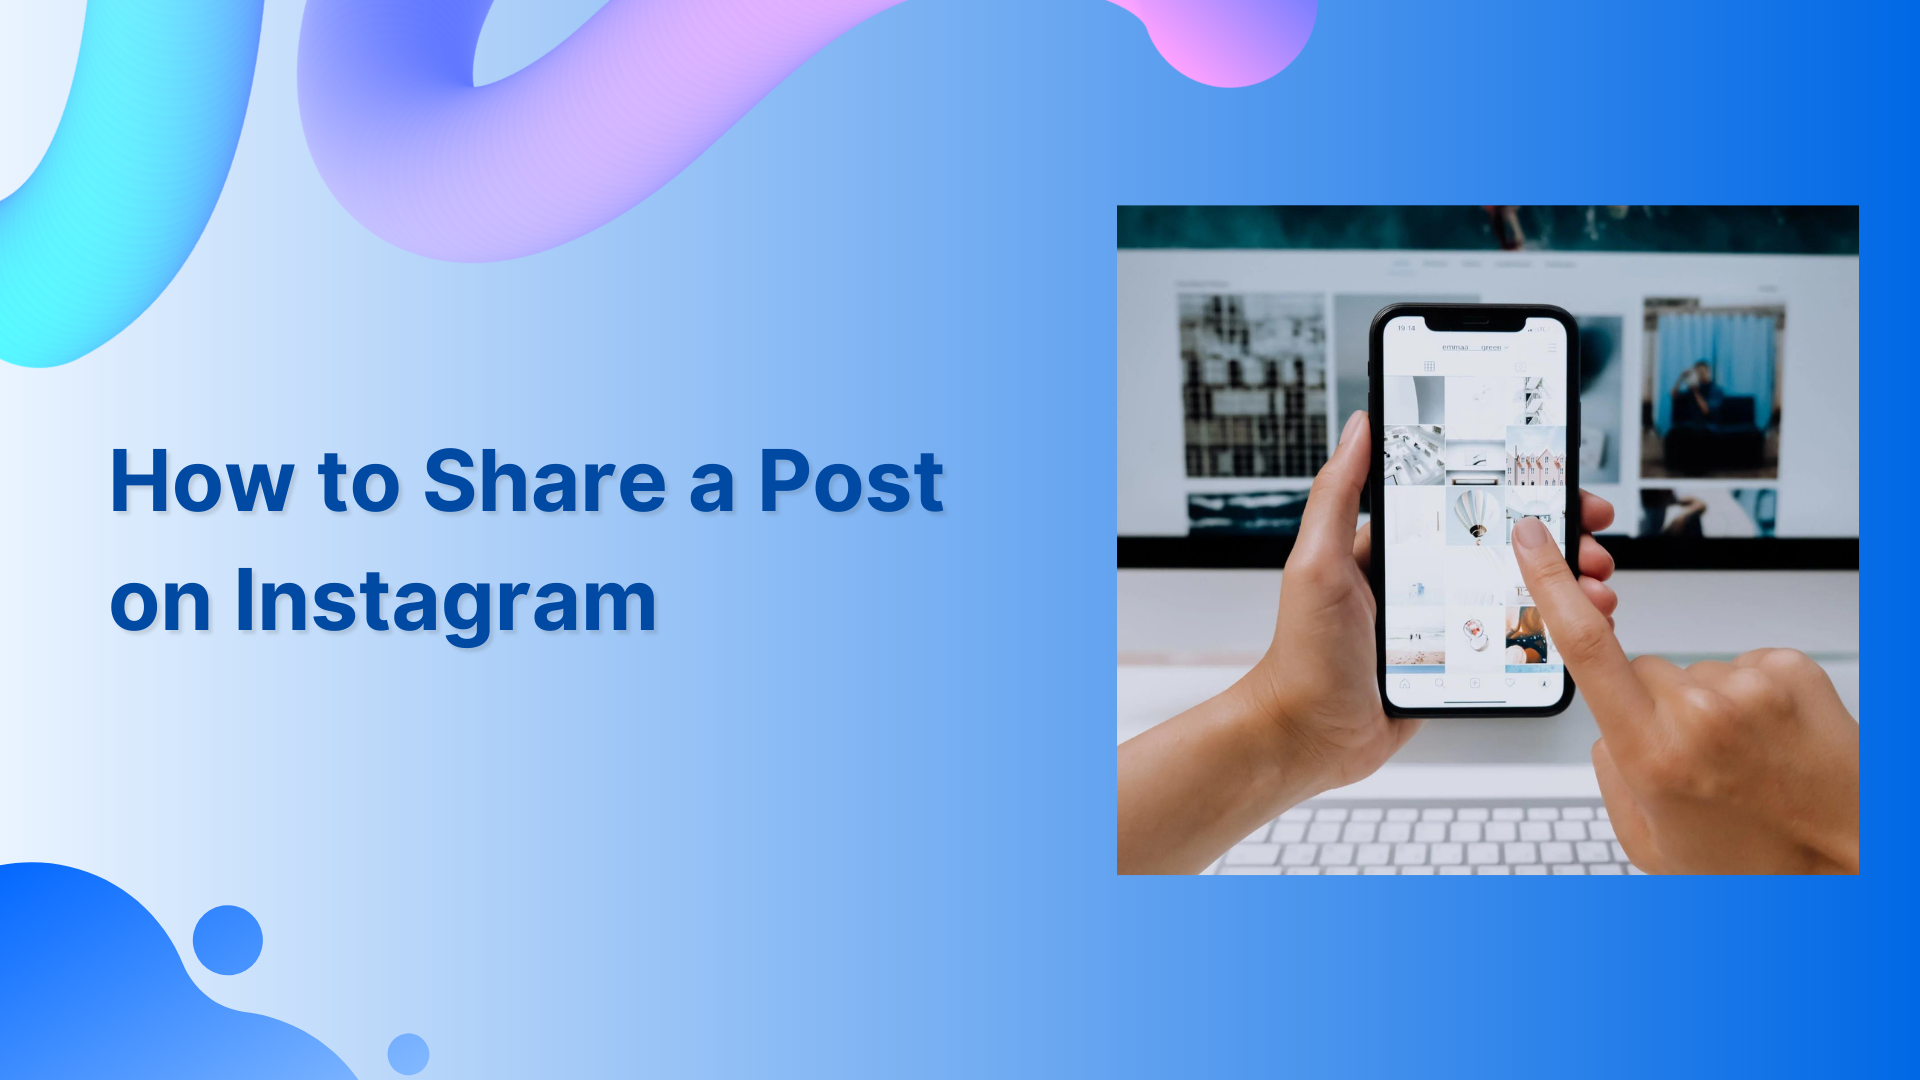 How to share a post on Instagram